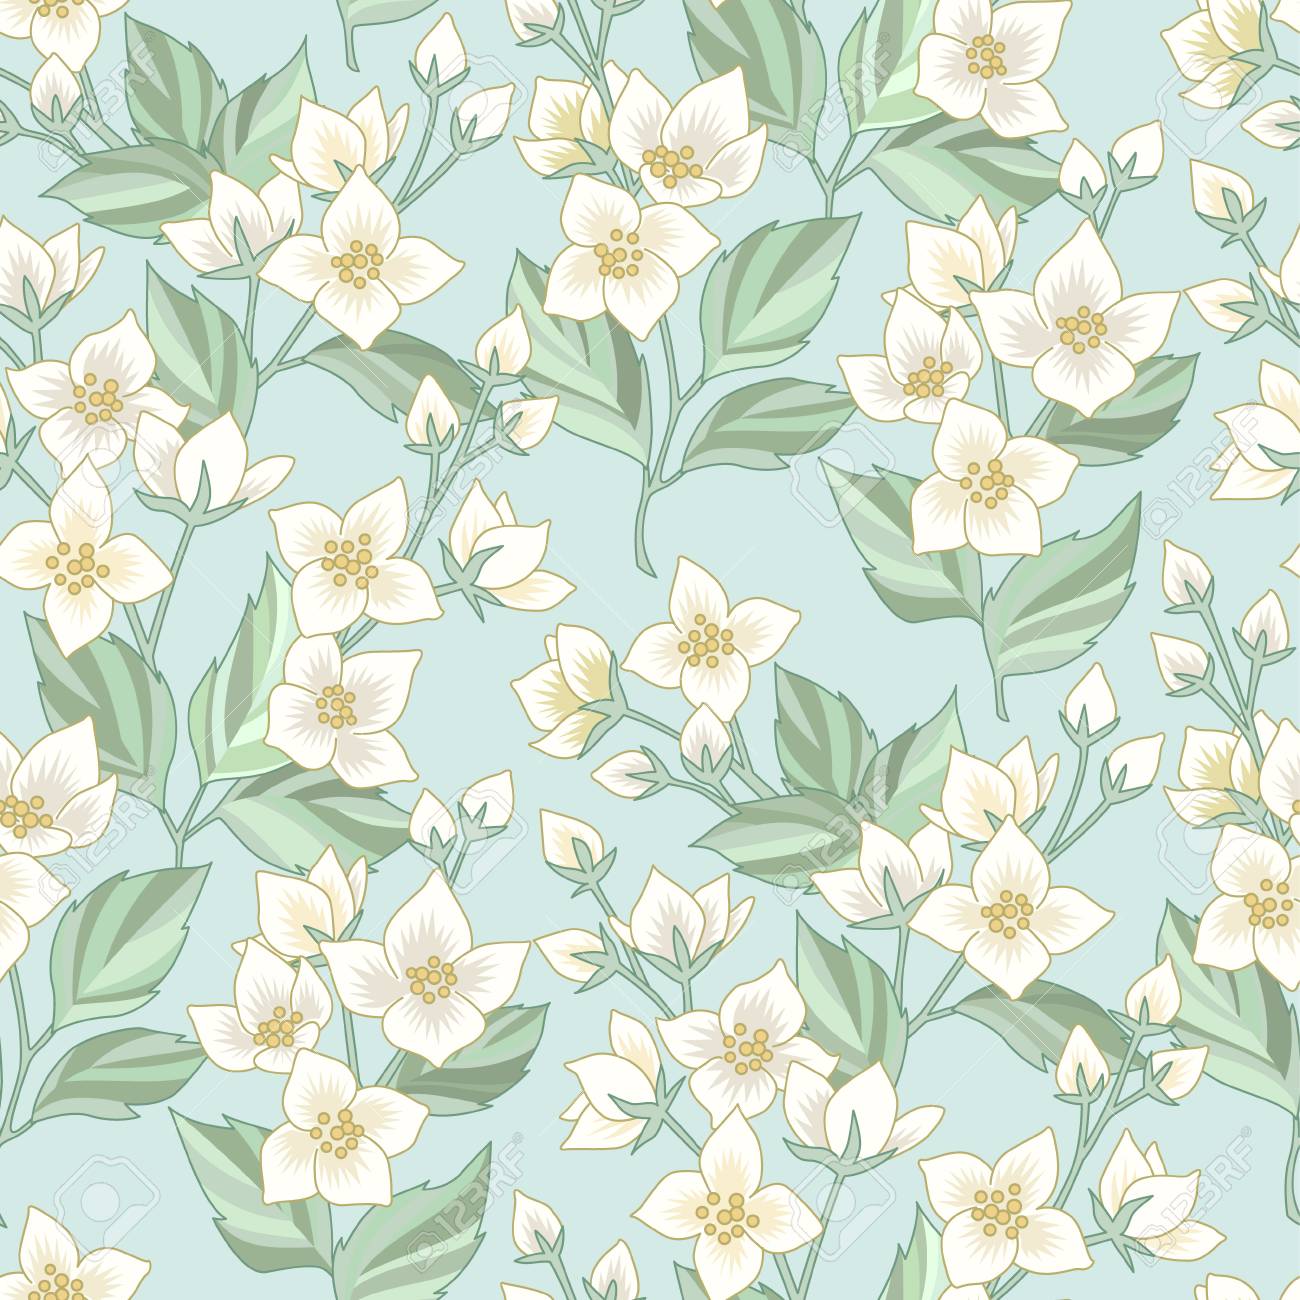 Floral Seamless Pattern With White Jasmine On Blue Background